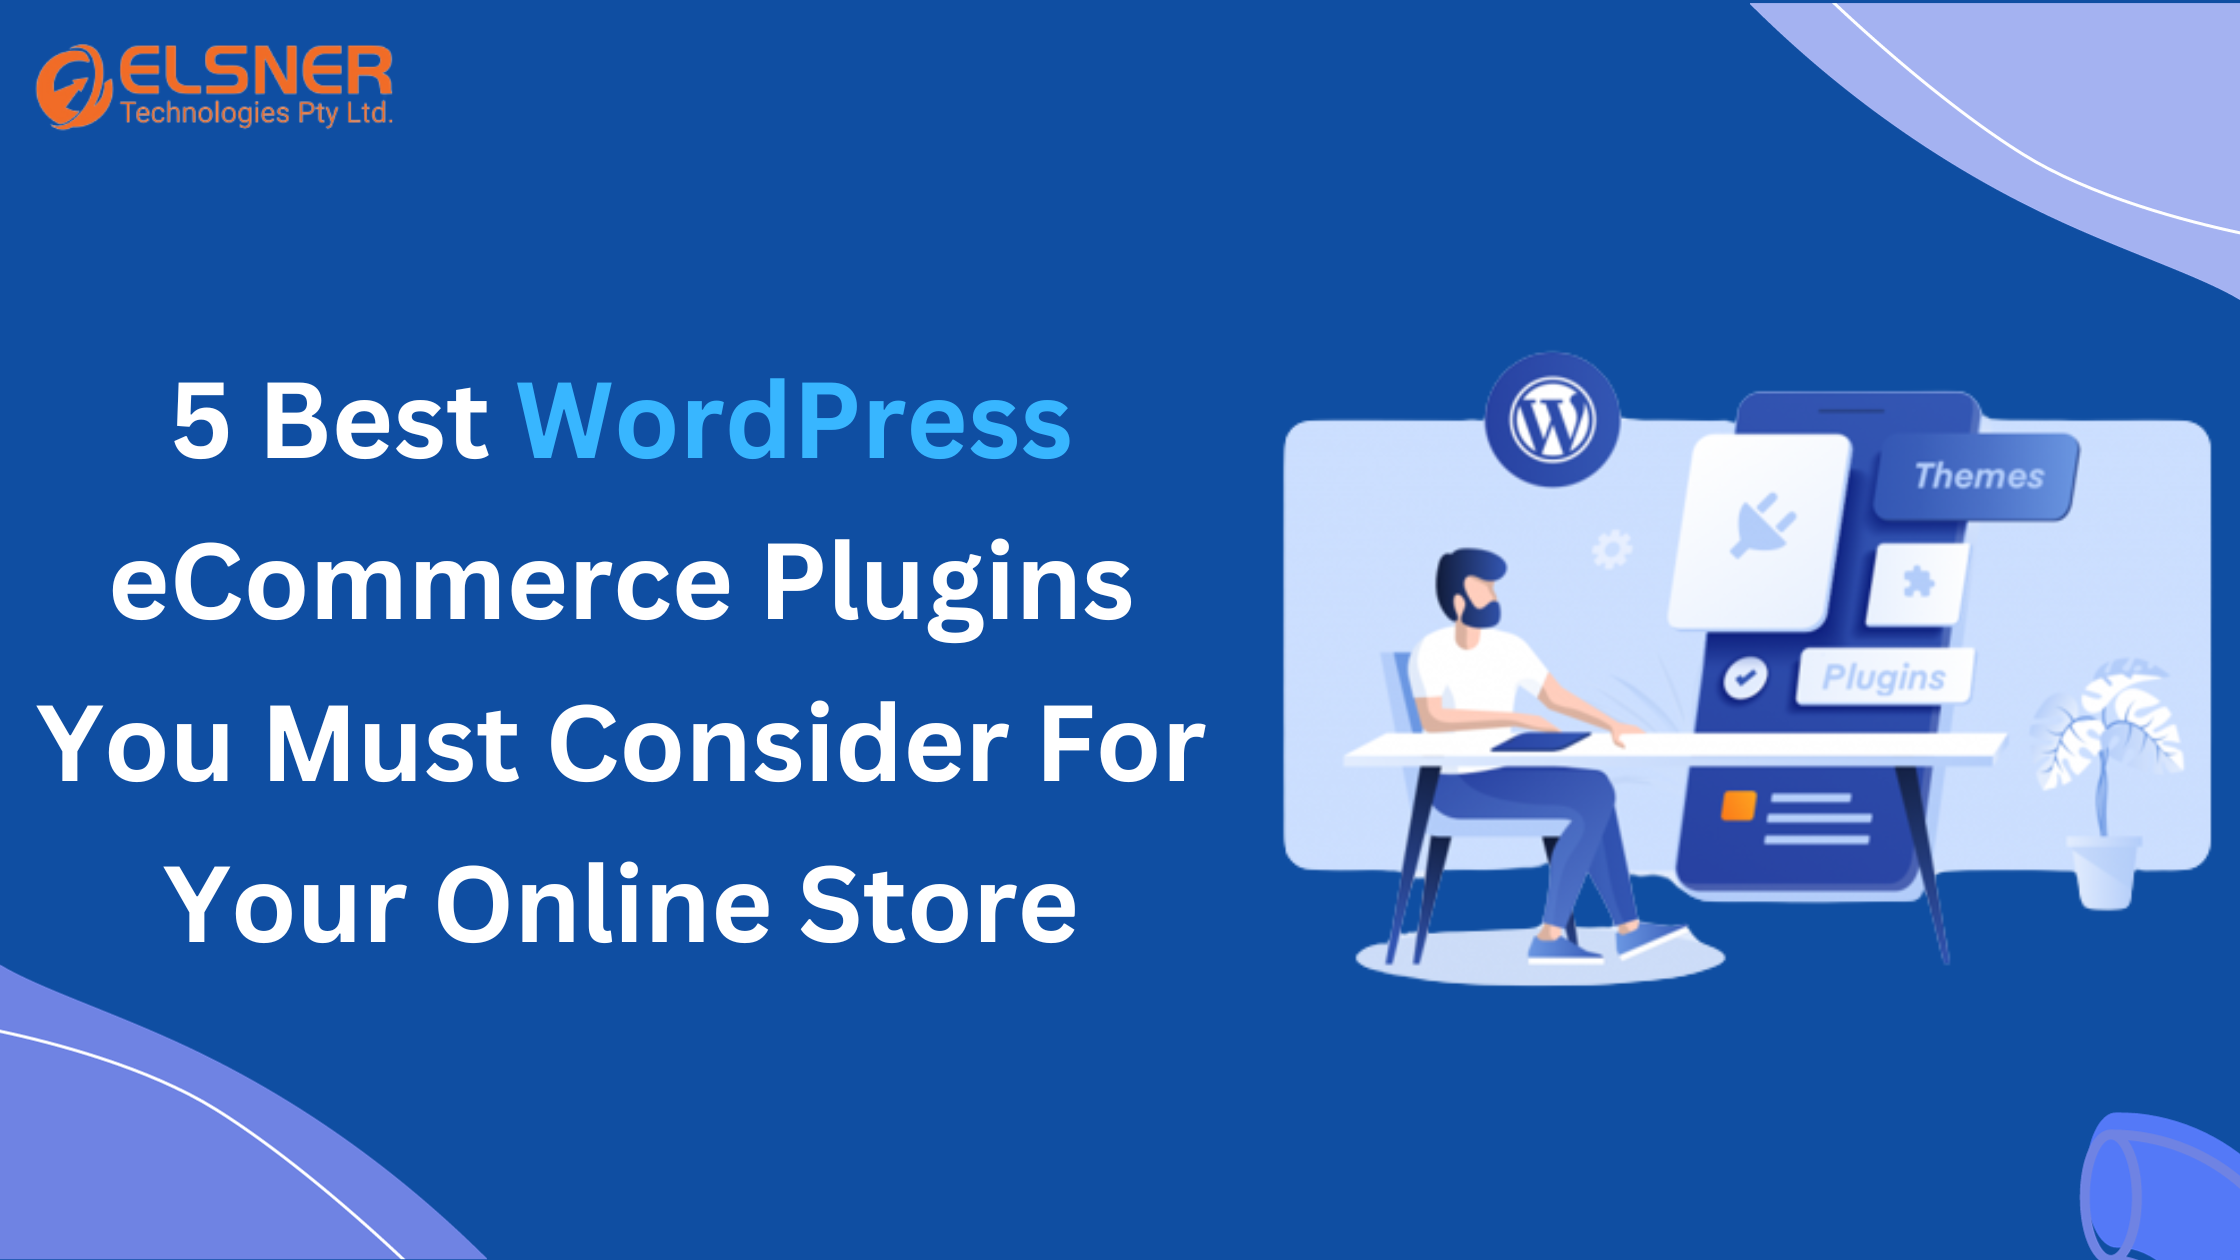 5 Best WordPress eCommerce Plugins You Must Consider For Your Online Store